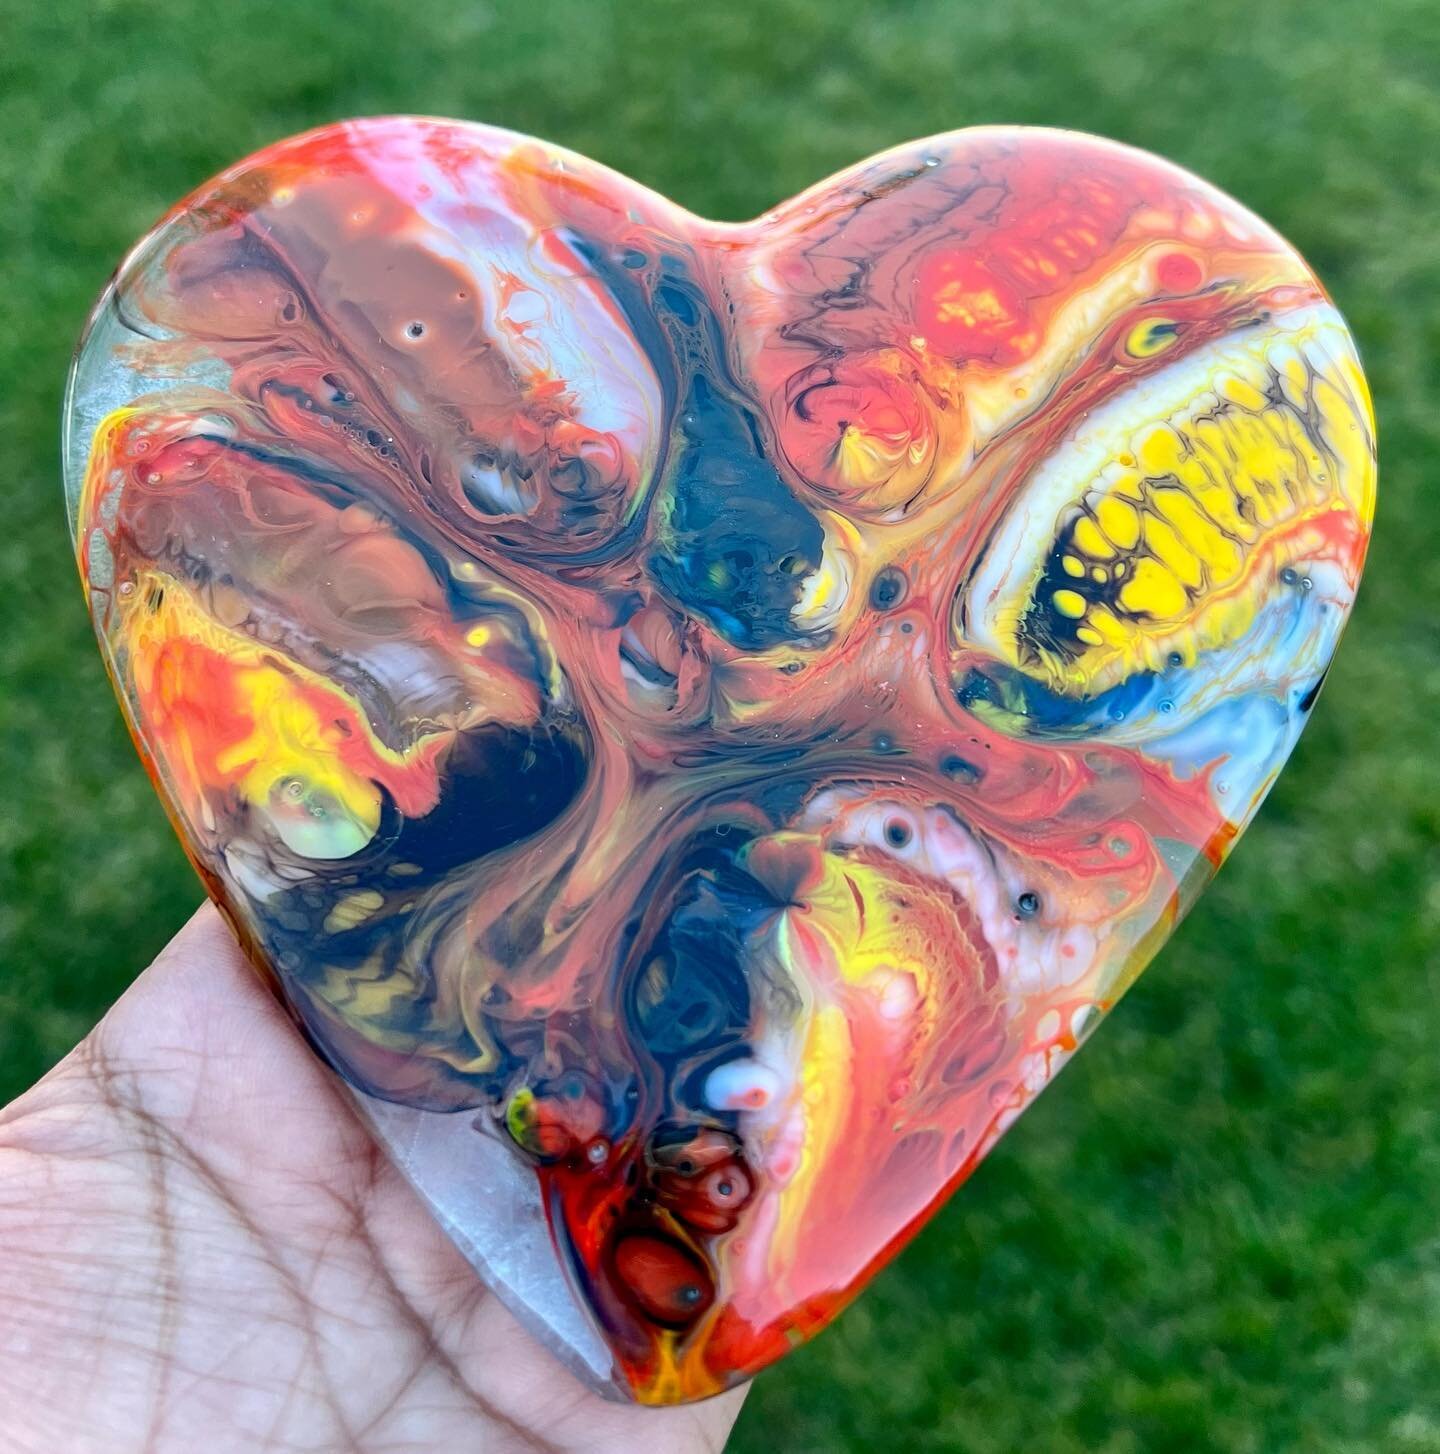 I&rsquo;m so excited for the upcoming fused glass pot melt hearts update.. 

If you have been following along my page, you know they are such a labor of love. They are all such beauties. So unique and one of a kind. 

#fusingkiln #firepolished #glass